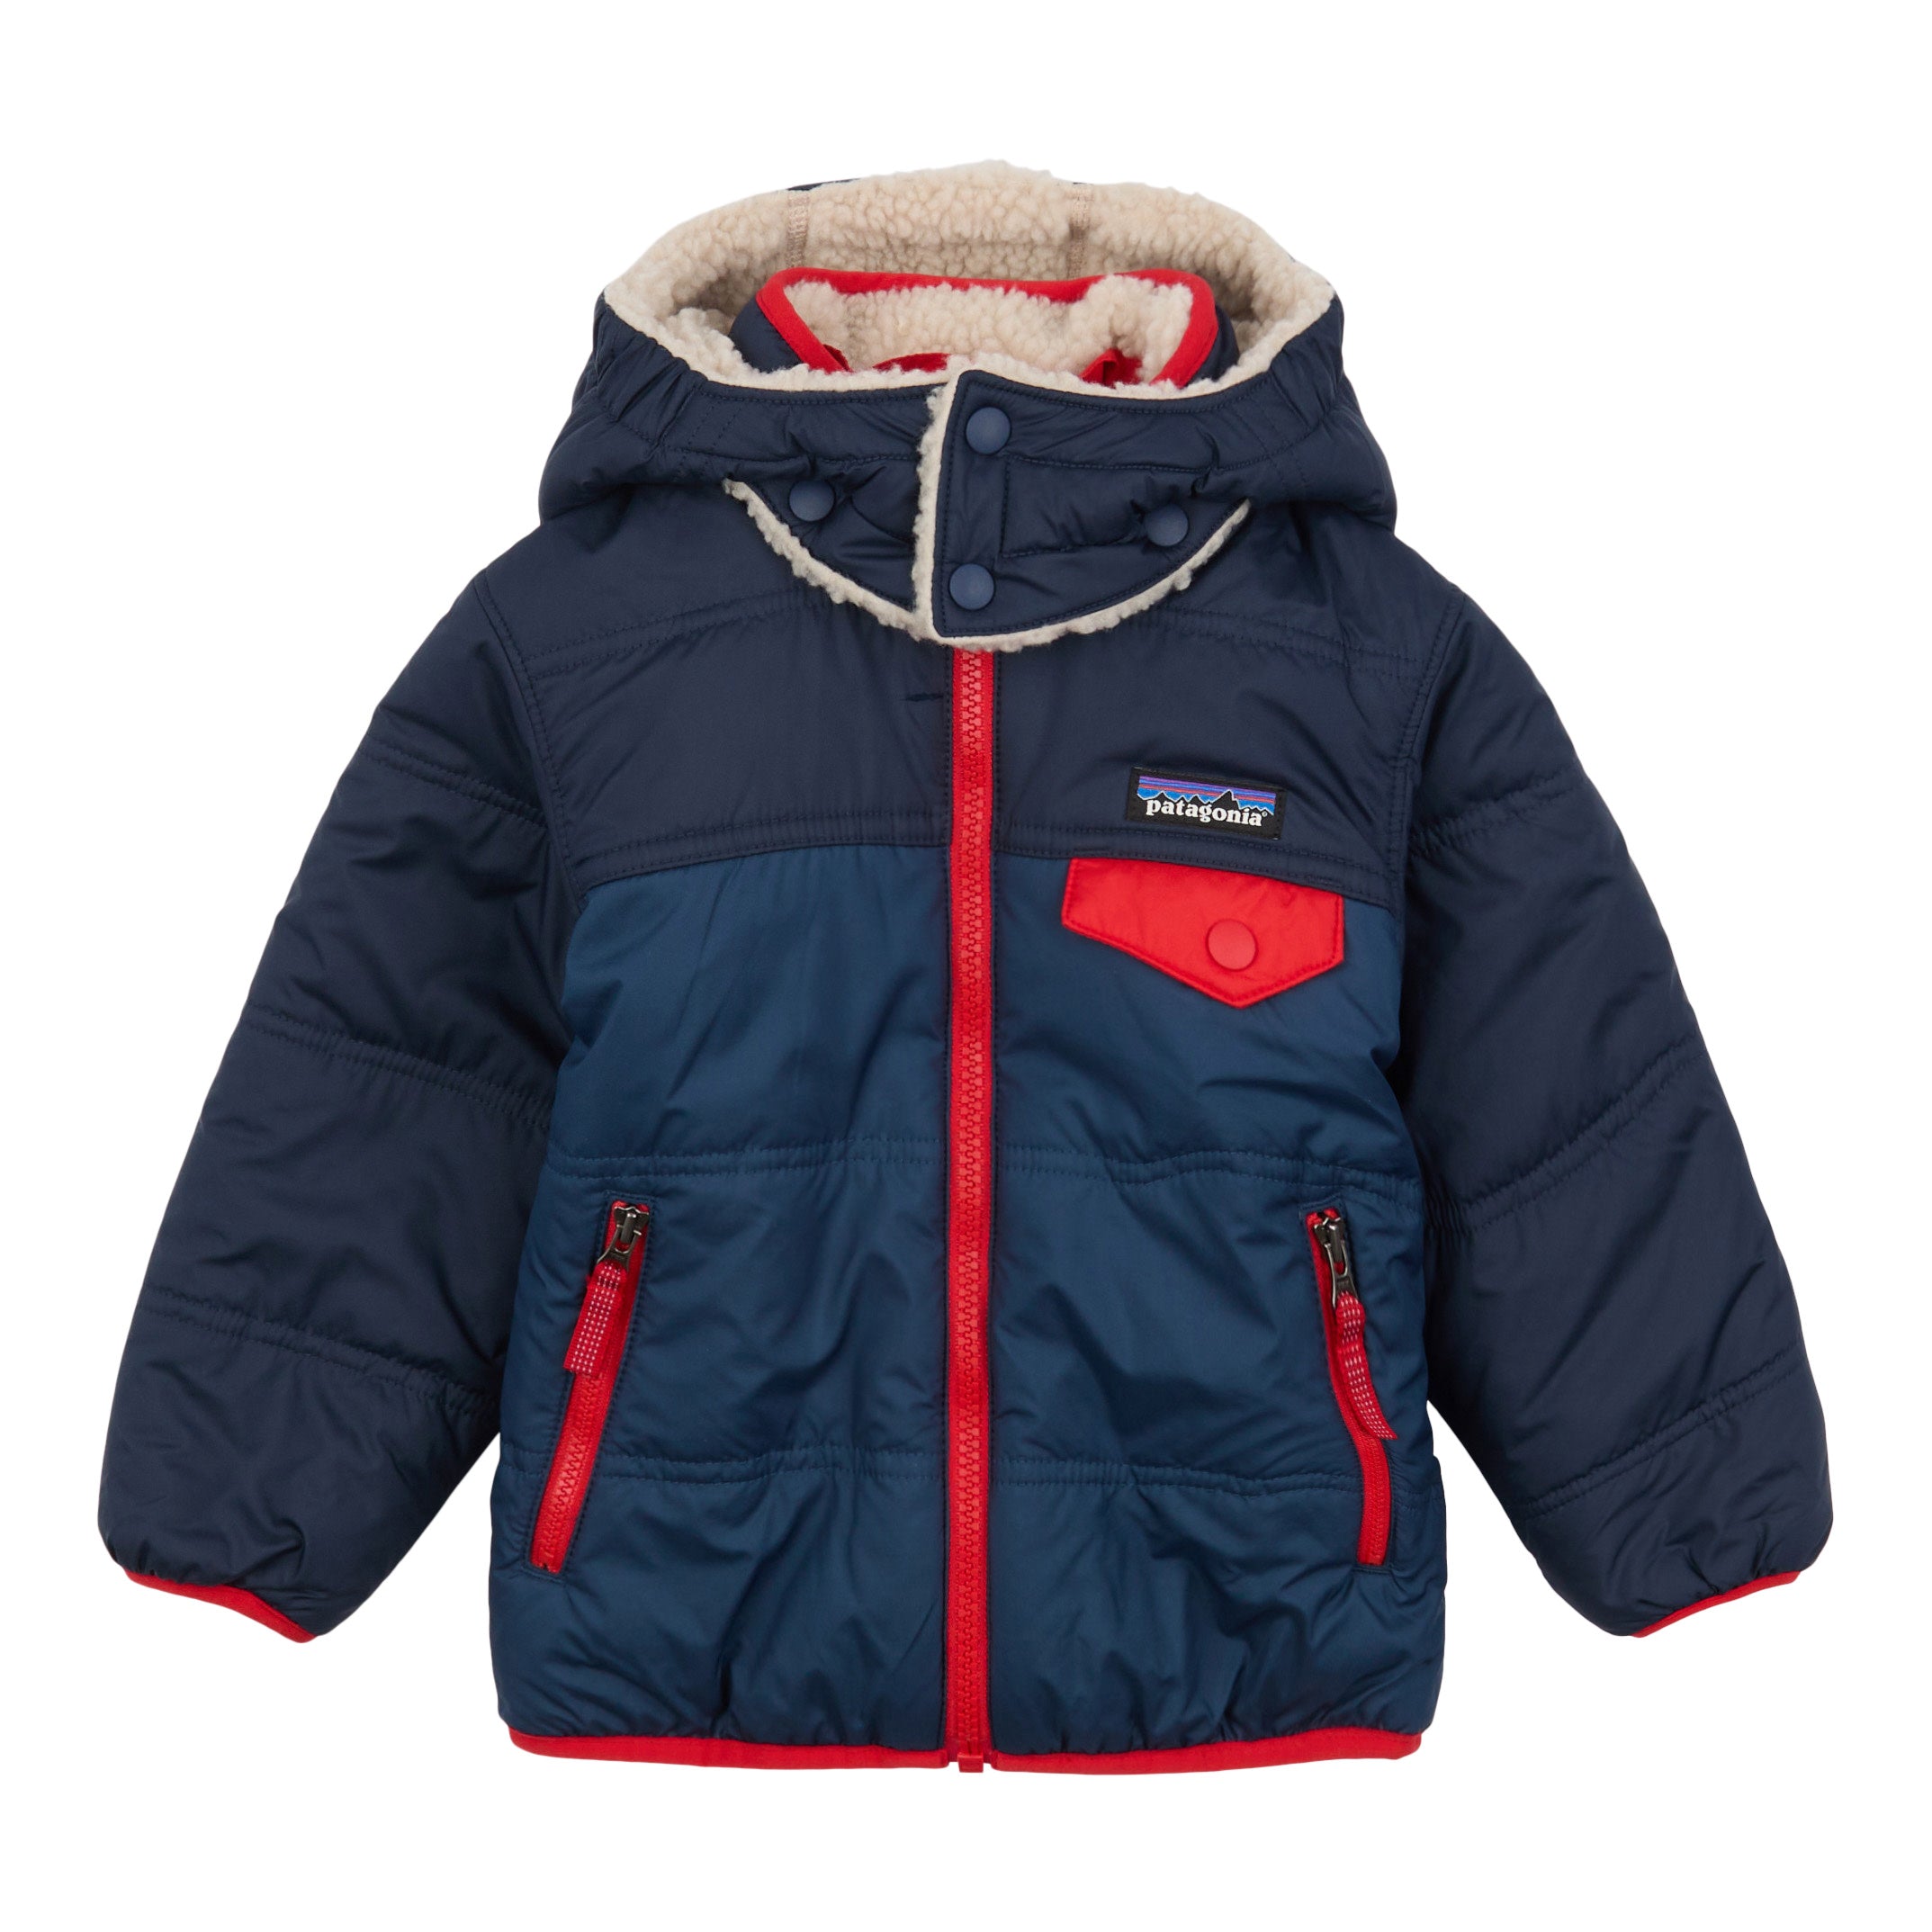 Used & Second Hand Children's Clothes & Gear | Patagonia® Worn 